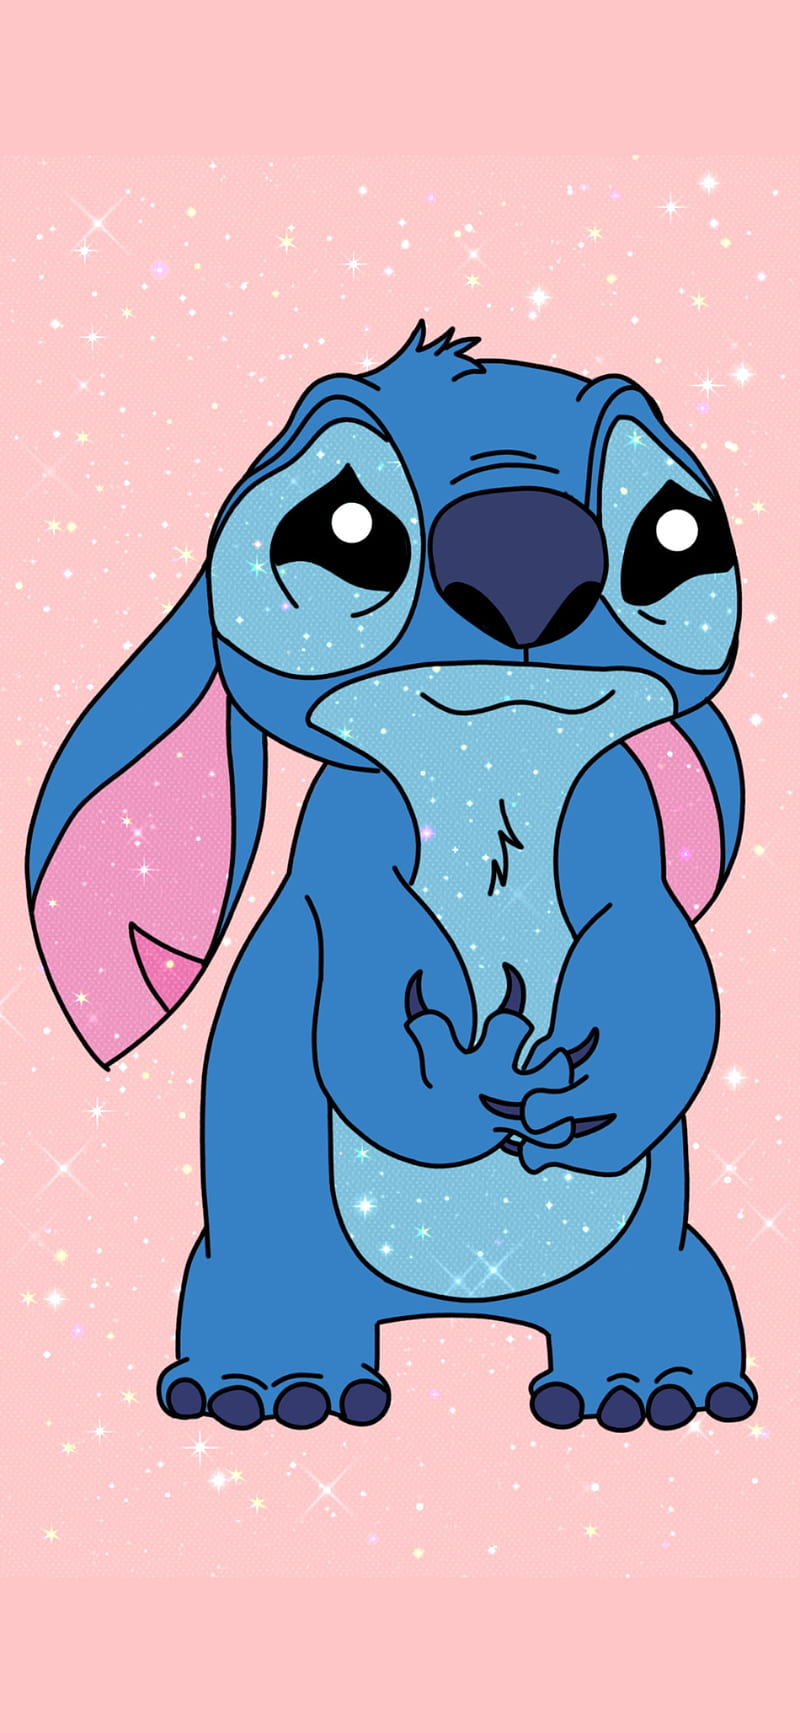 Leo and stitch, beauty, cute, flower, iphone, iphone12, love, nature ...